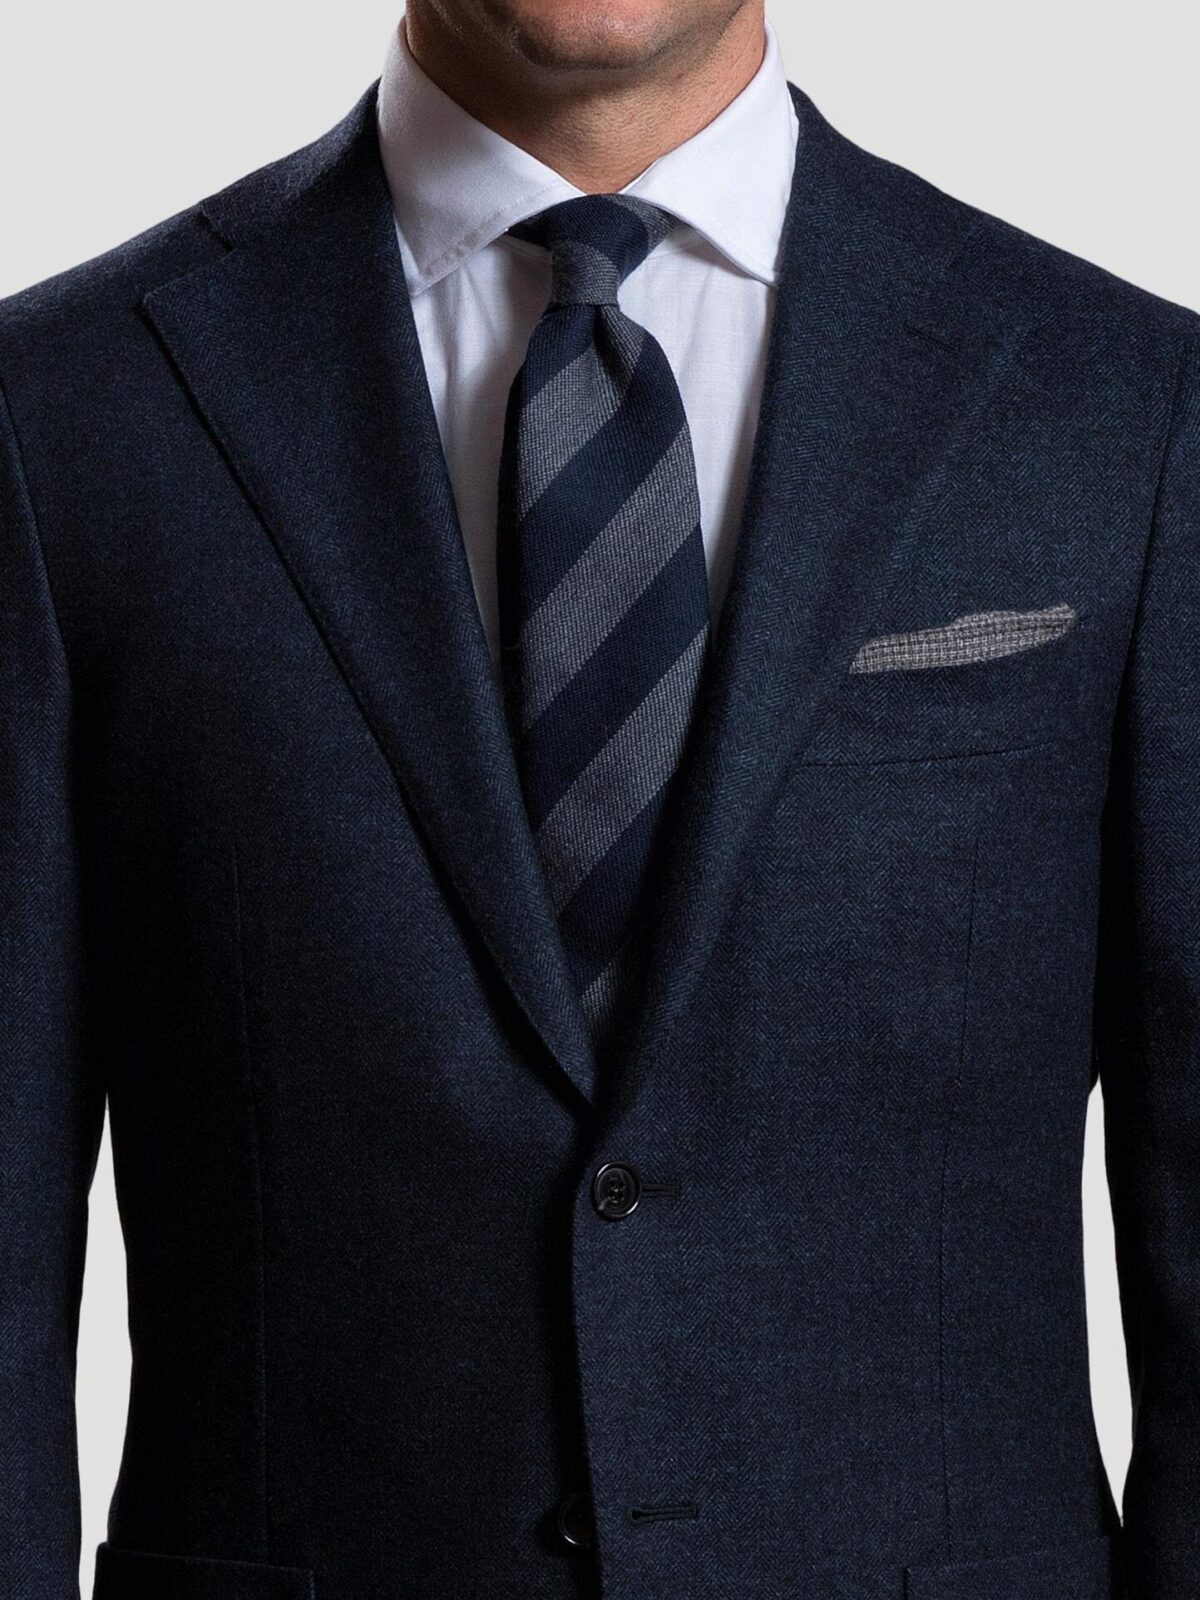 Navy and Grey Wool Striped Tie